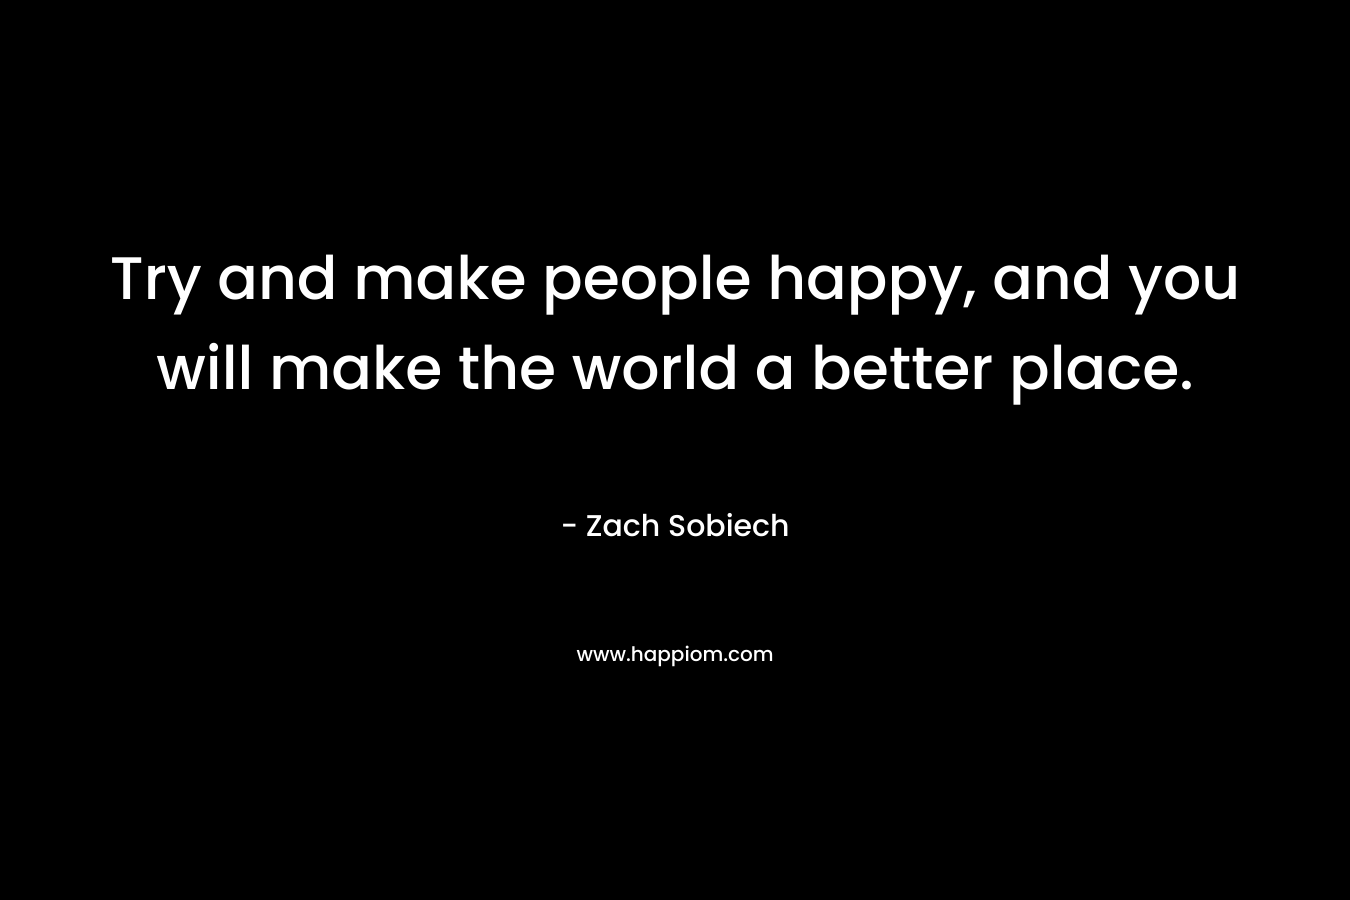 Try and make people happy, and you will make the world a better place.